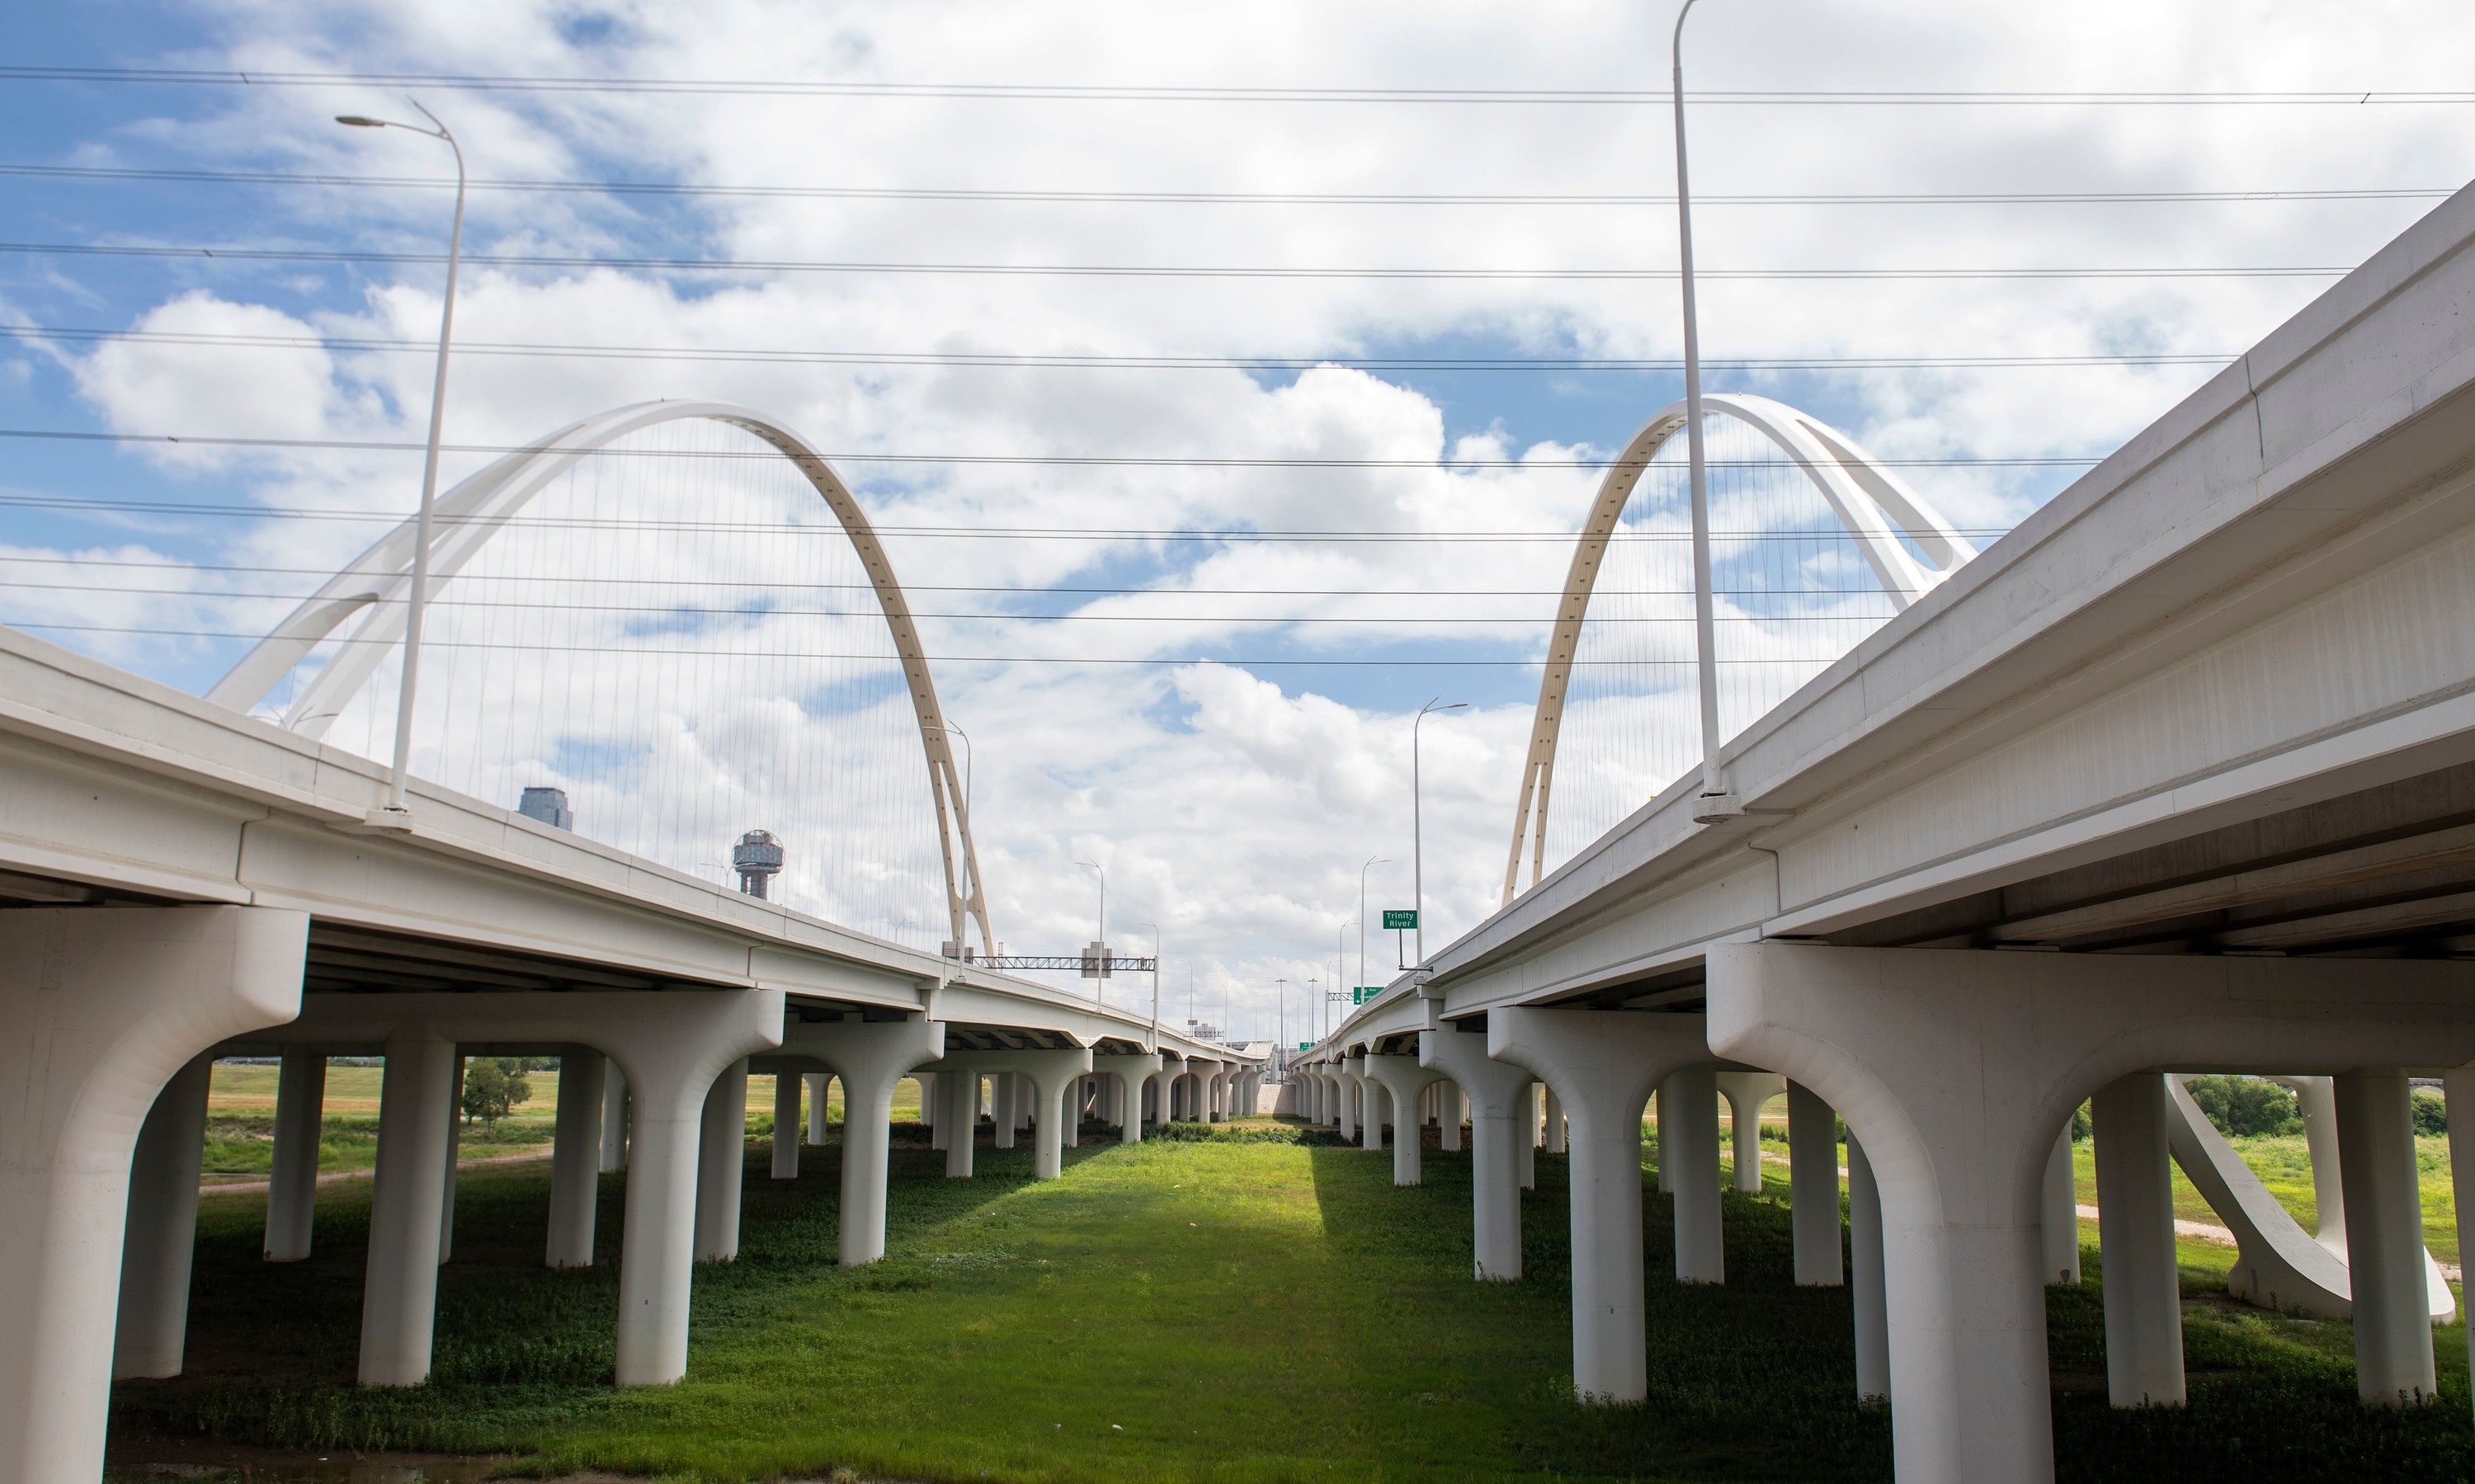 Two stretches of an elevated highway above grass under a sunny sky with clouds